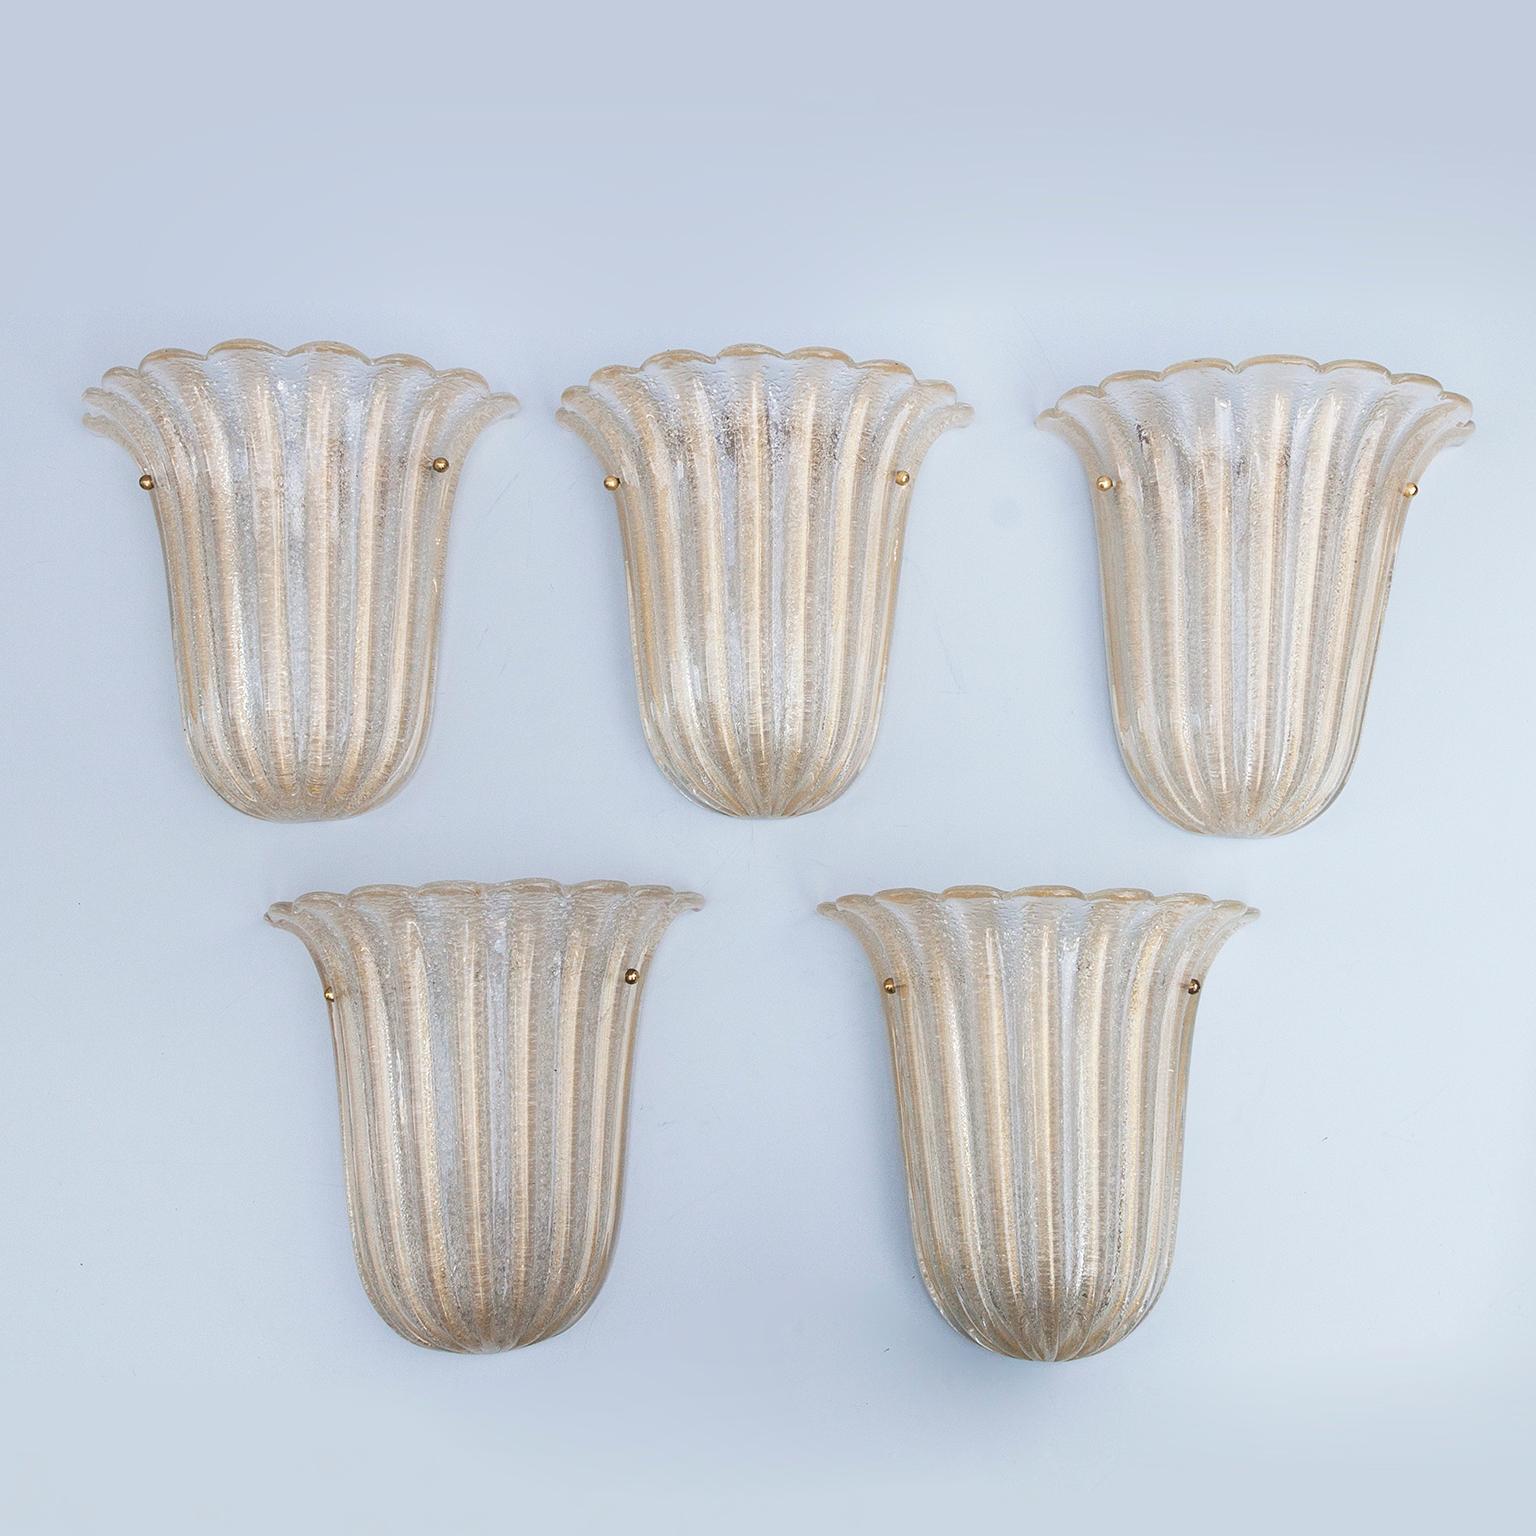 Set of three Murano glass sconces made by Barovier e Toso, Italy, 1960s.
The glass is hand blown and is infused with gold using the Foglia d’oro technique, the reverse side of the sconces were made using the Rugiada technique with minute fragments